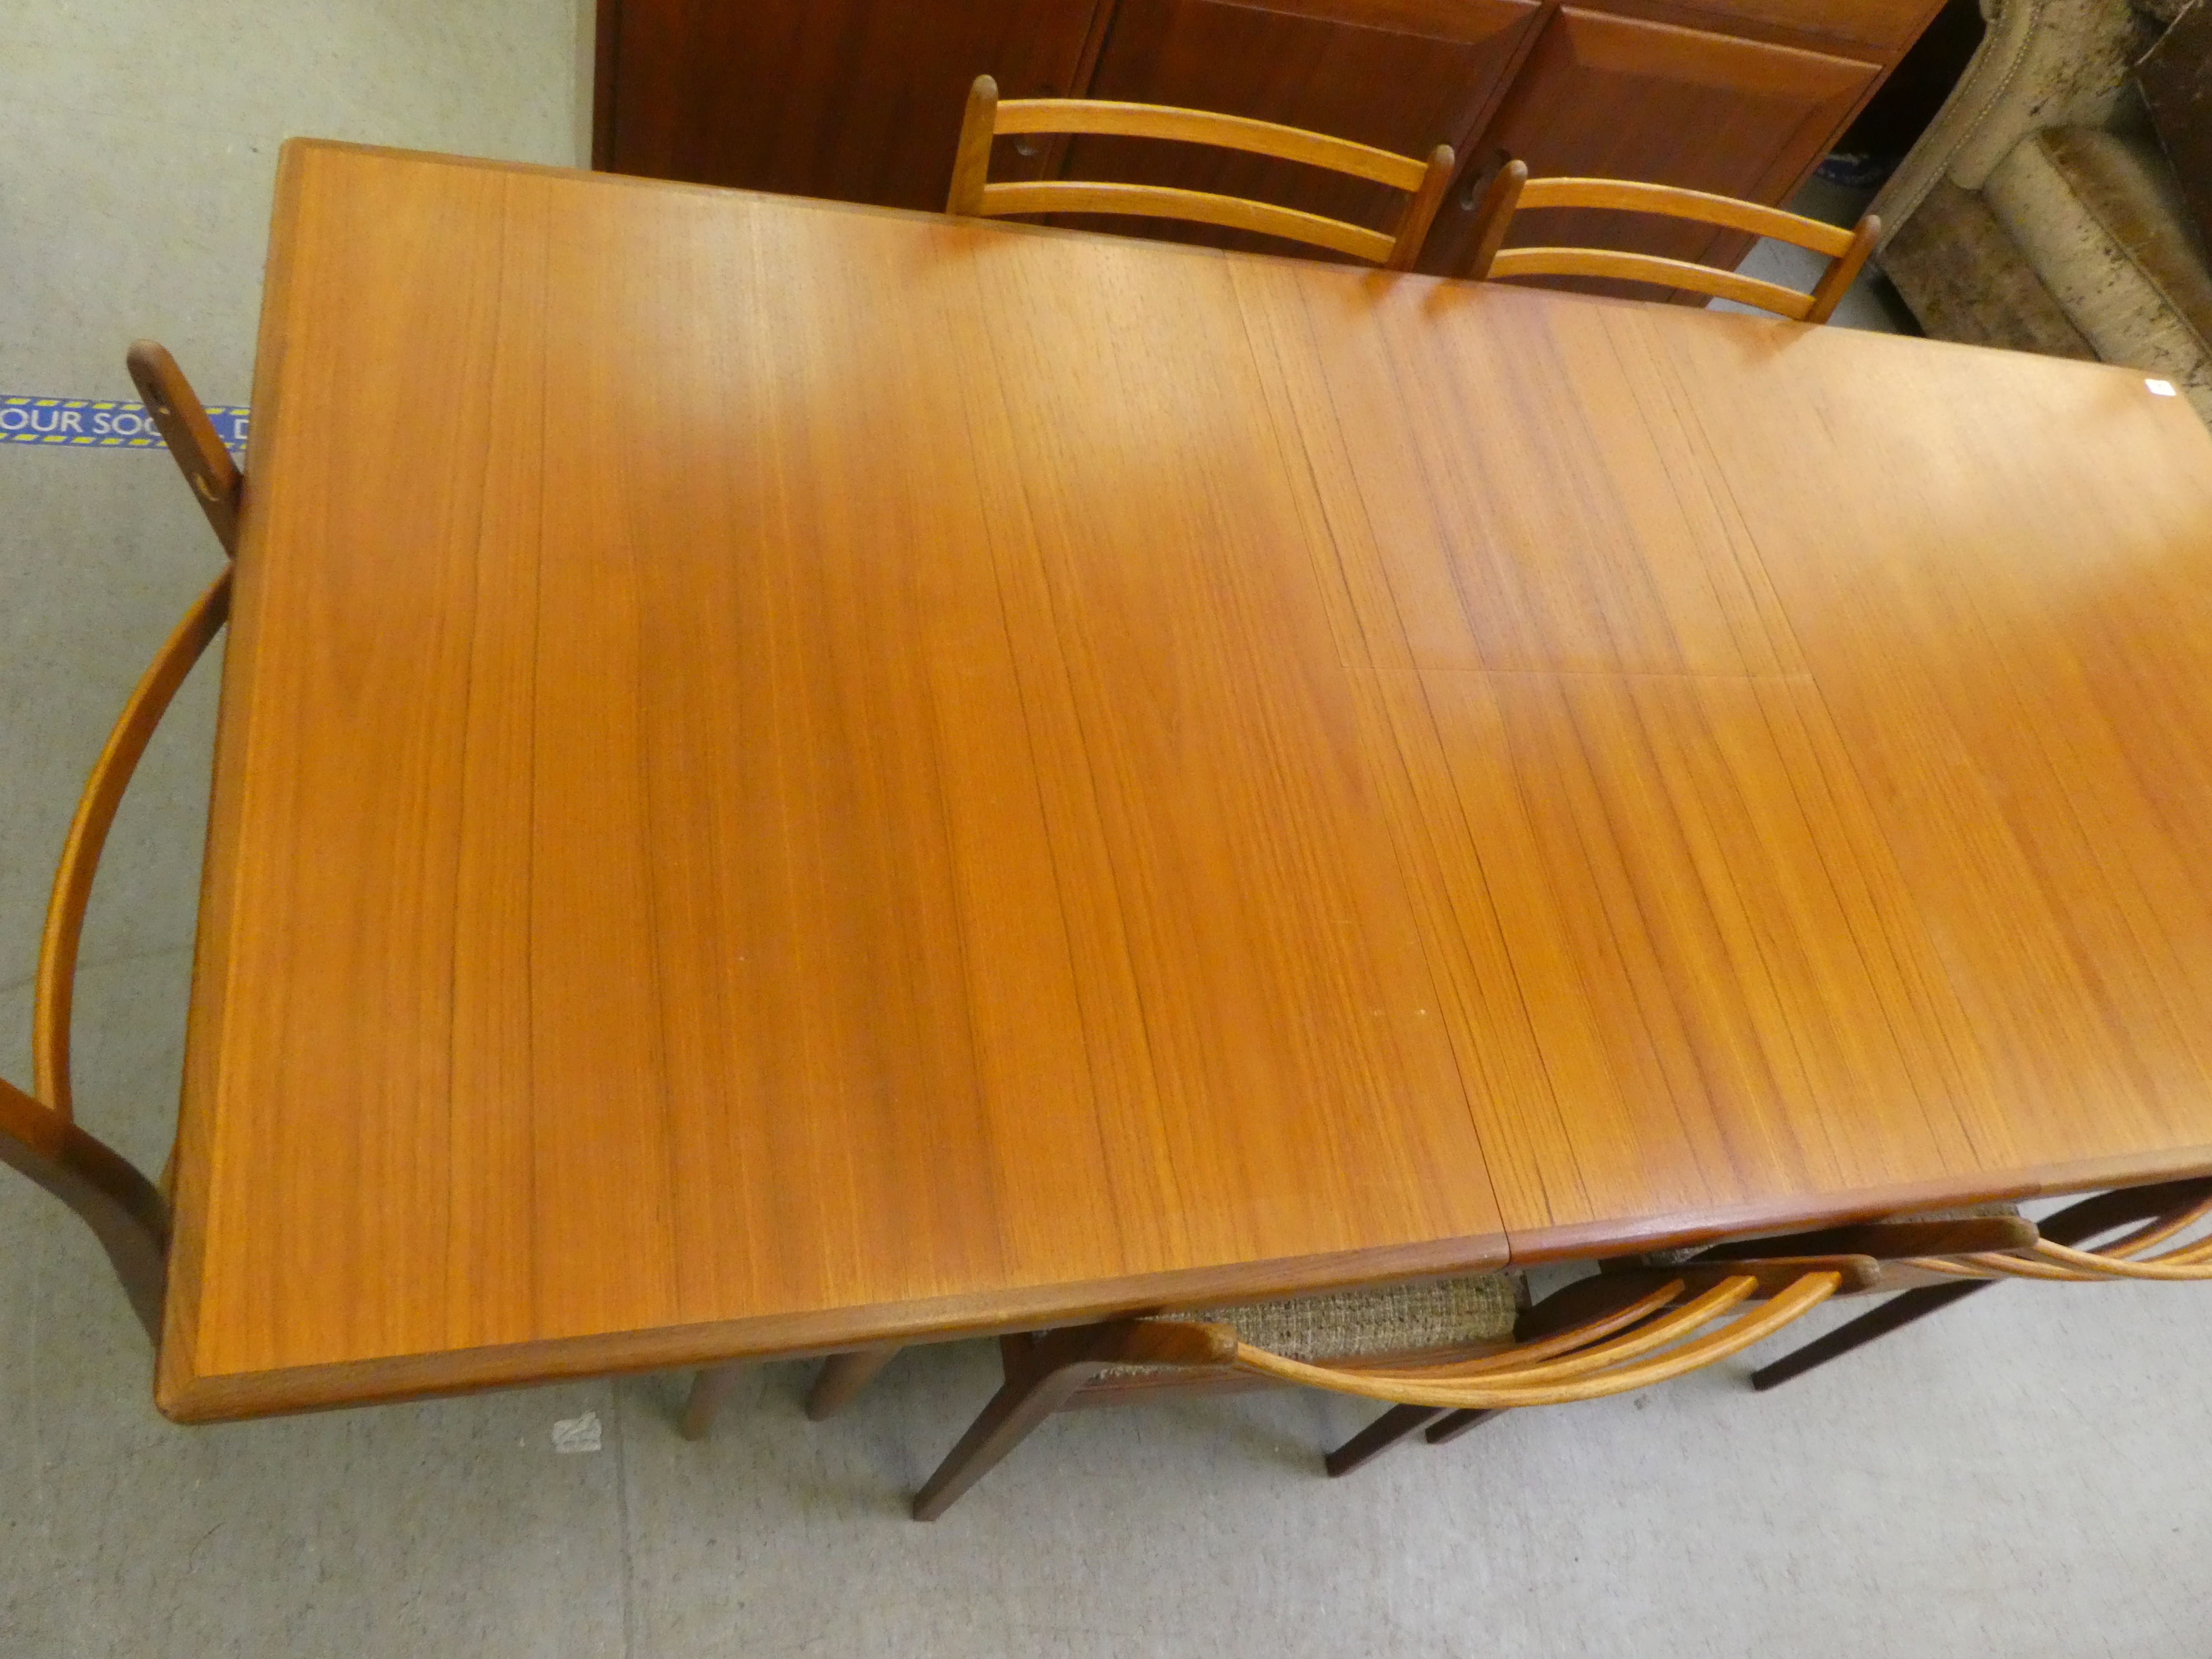 A 1970s teak G-Plan dining table, raised on turned, tapered legs  29"h  62"L extending to 80"L - Image 2 of 8